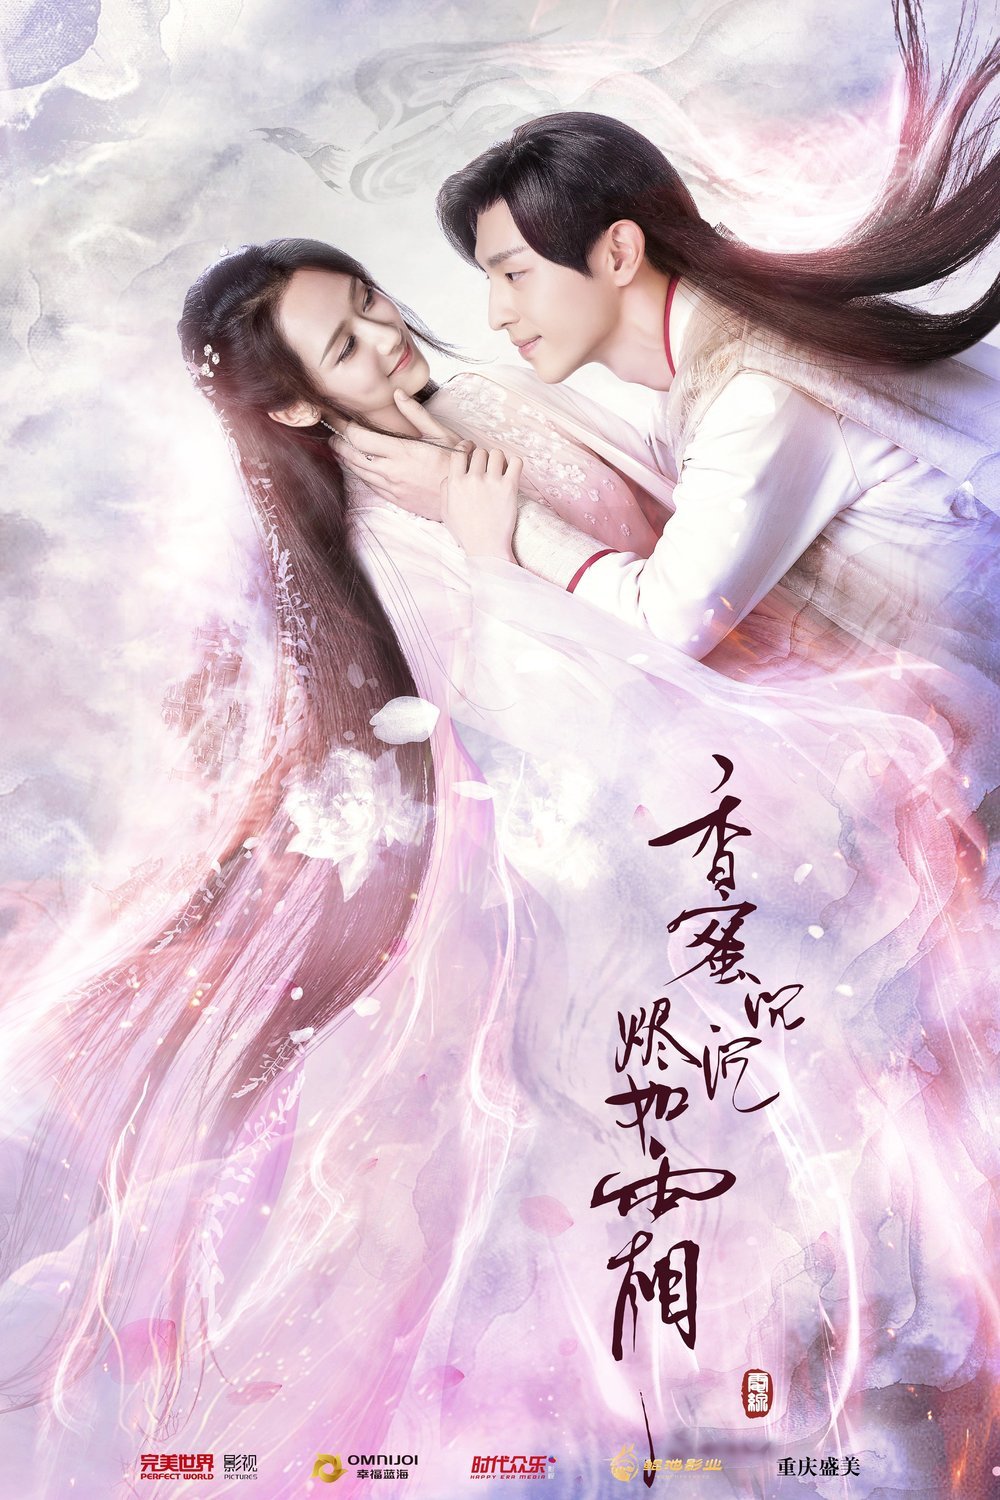 Mandarin poster of the movie Ashes of Love